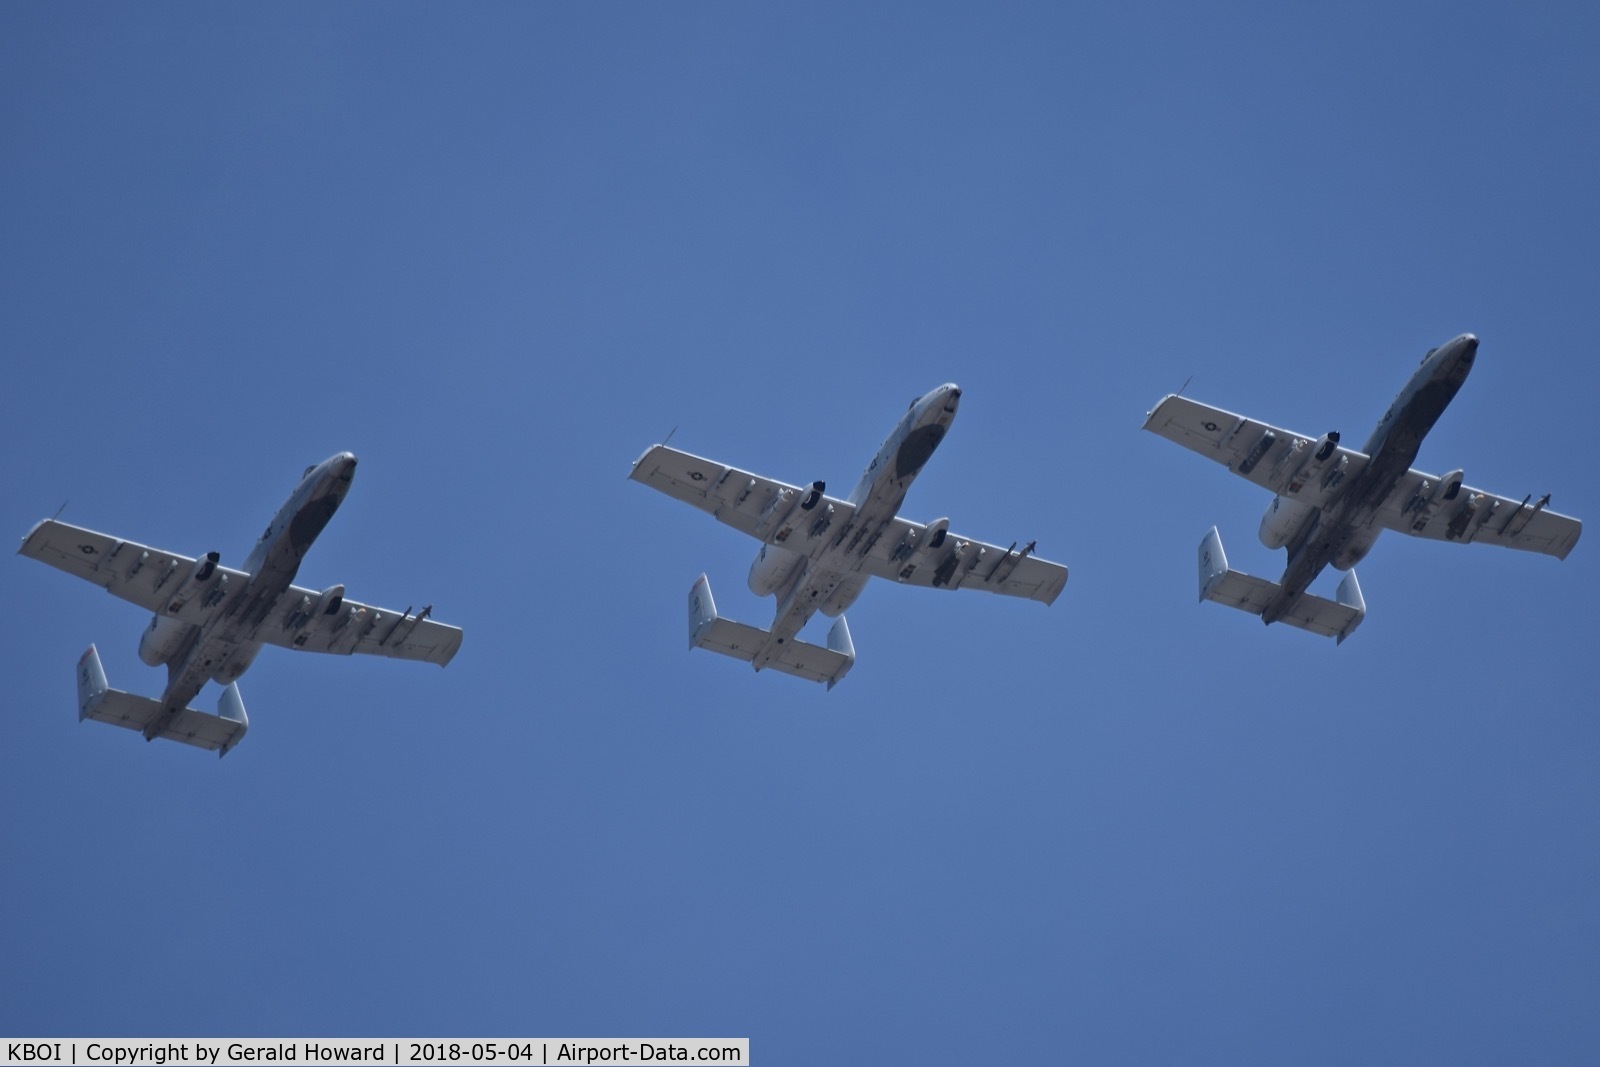 Boise Air Terminal/gowen Fld Airport (BOI) - Flight of three A-10s from the 190th Fighter Sq., Idaho ANG flying the downwind for RWY 10R.